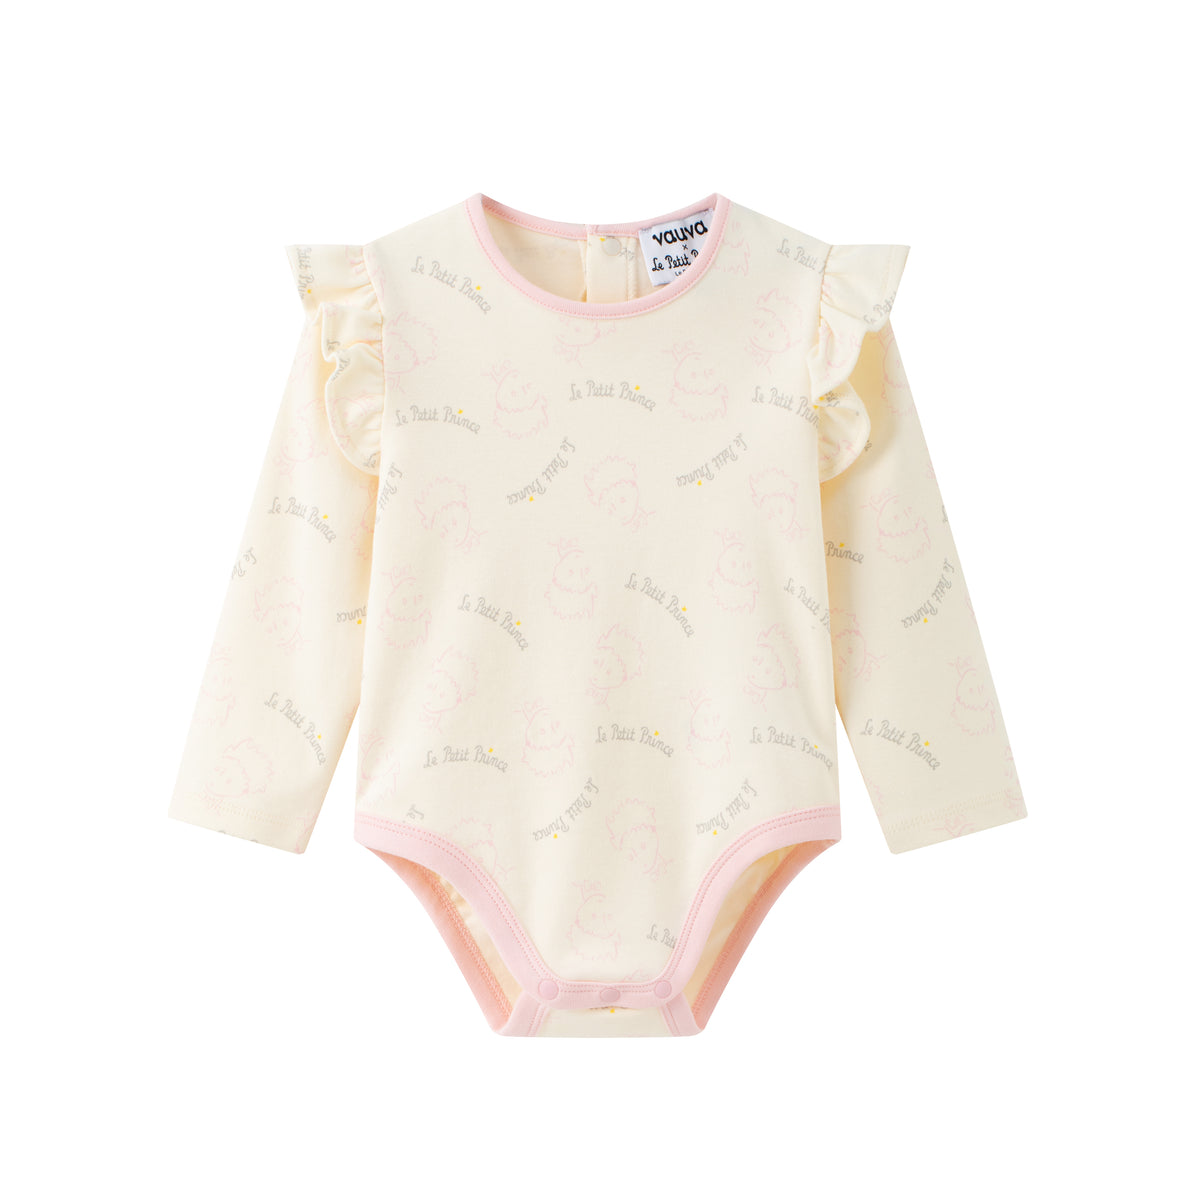 Vauva x Le Petit Prince - Baby Girl Little Prince Full Print Long Sleeve Bodysuit product image front